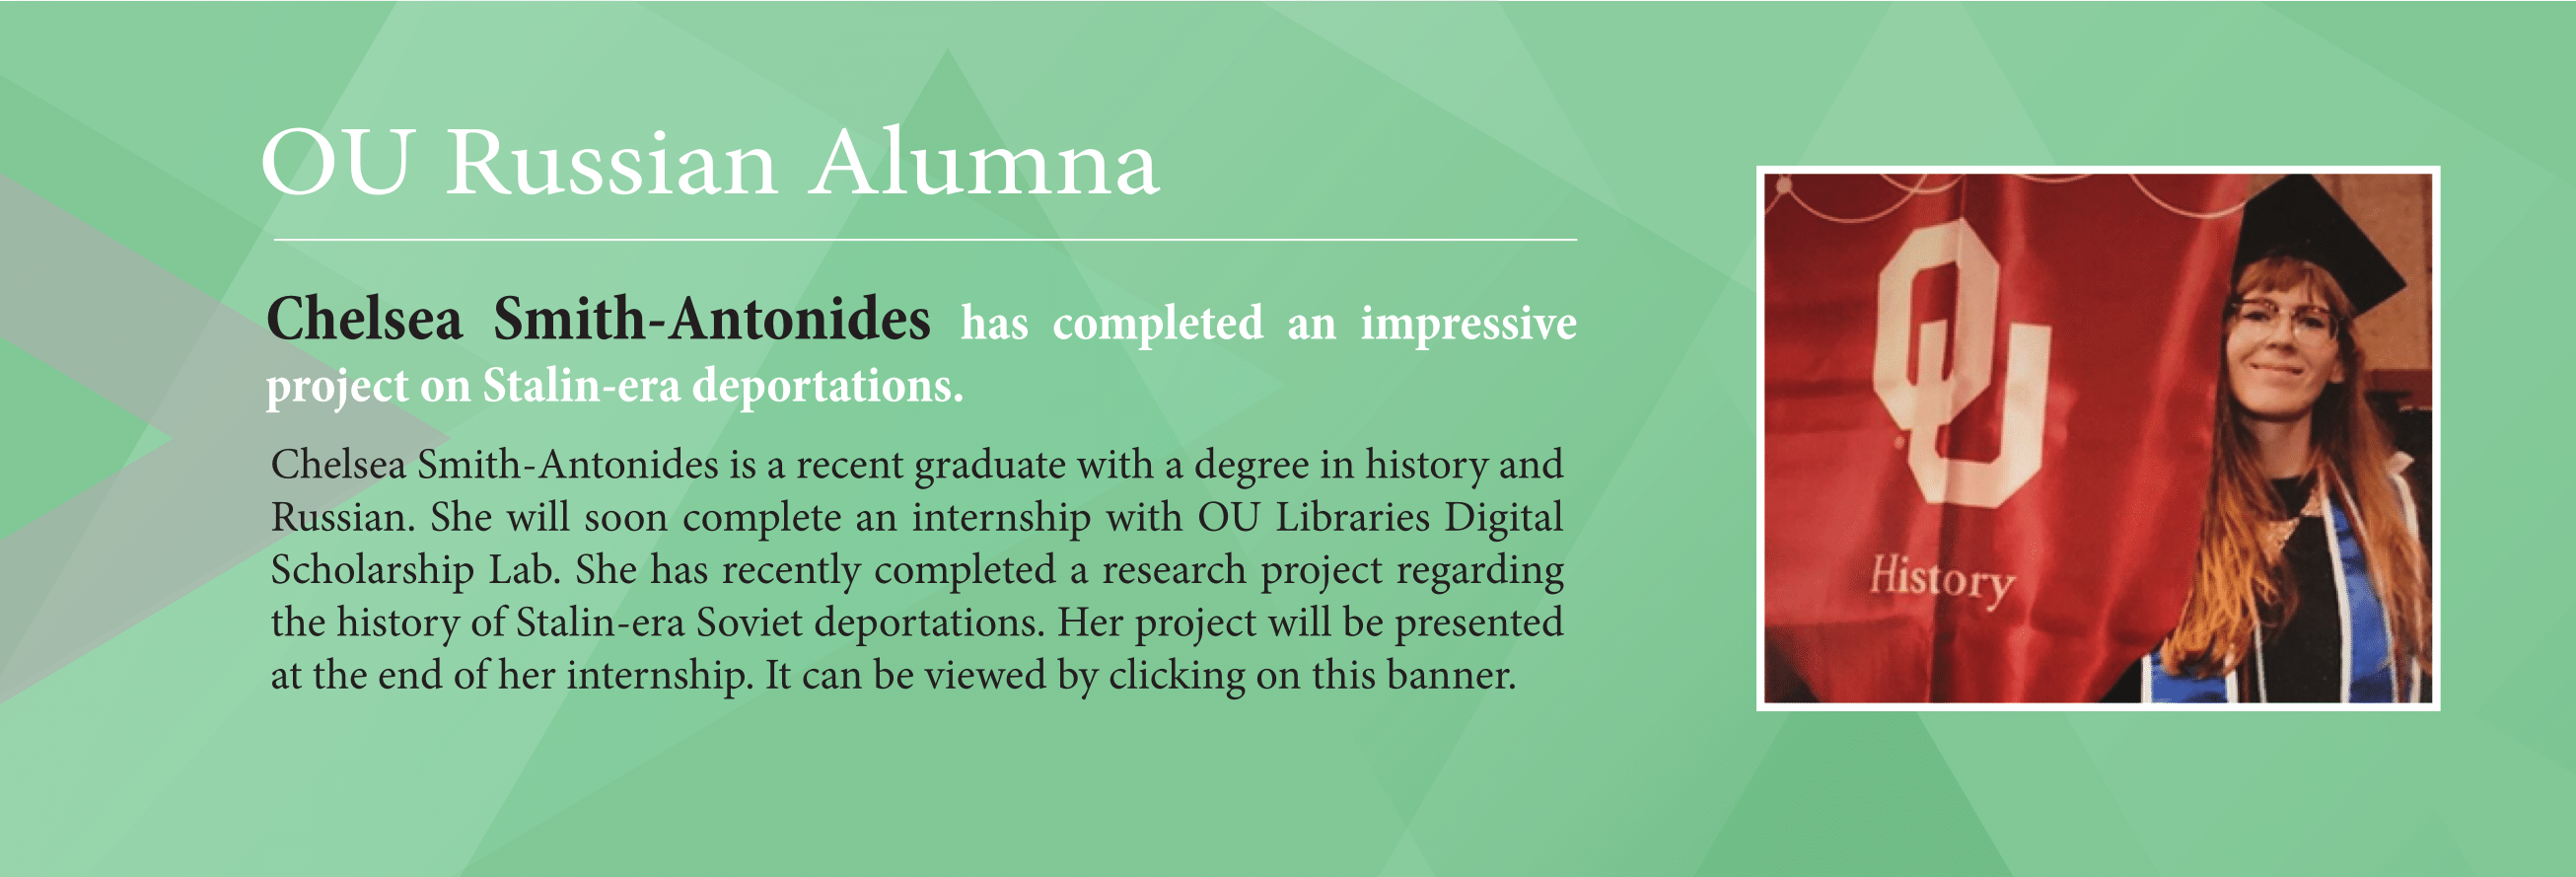 Green banner with image of a red headed woman holding an OU history banner. The banner says, Chelsea Smith-Antonides has completed an impressive project on Stalin-era deportations.  Chelsea Smith-Antonides is a recent graduate with a degree in history and Russian. She will soon complete an internship with OU Libraries Digital Scholarship Lab. She has recently completed a research project regarding the history of Stalin-era Soviet deportations. Her project will be presented at the end of her internship.